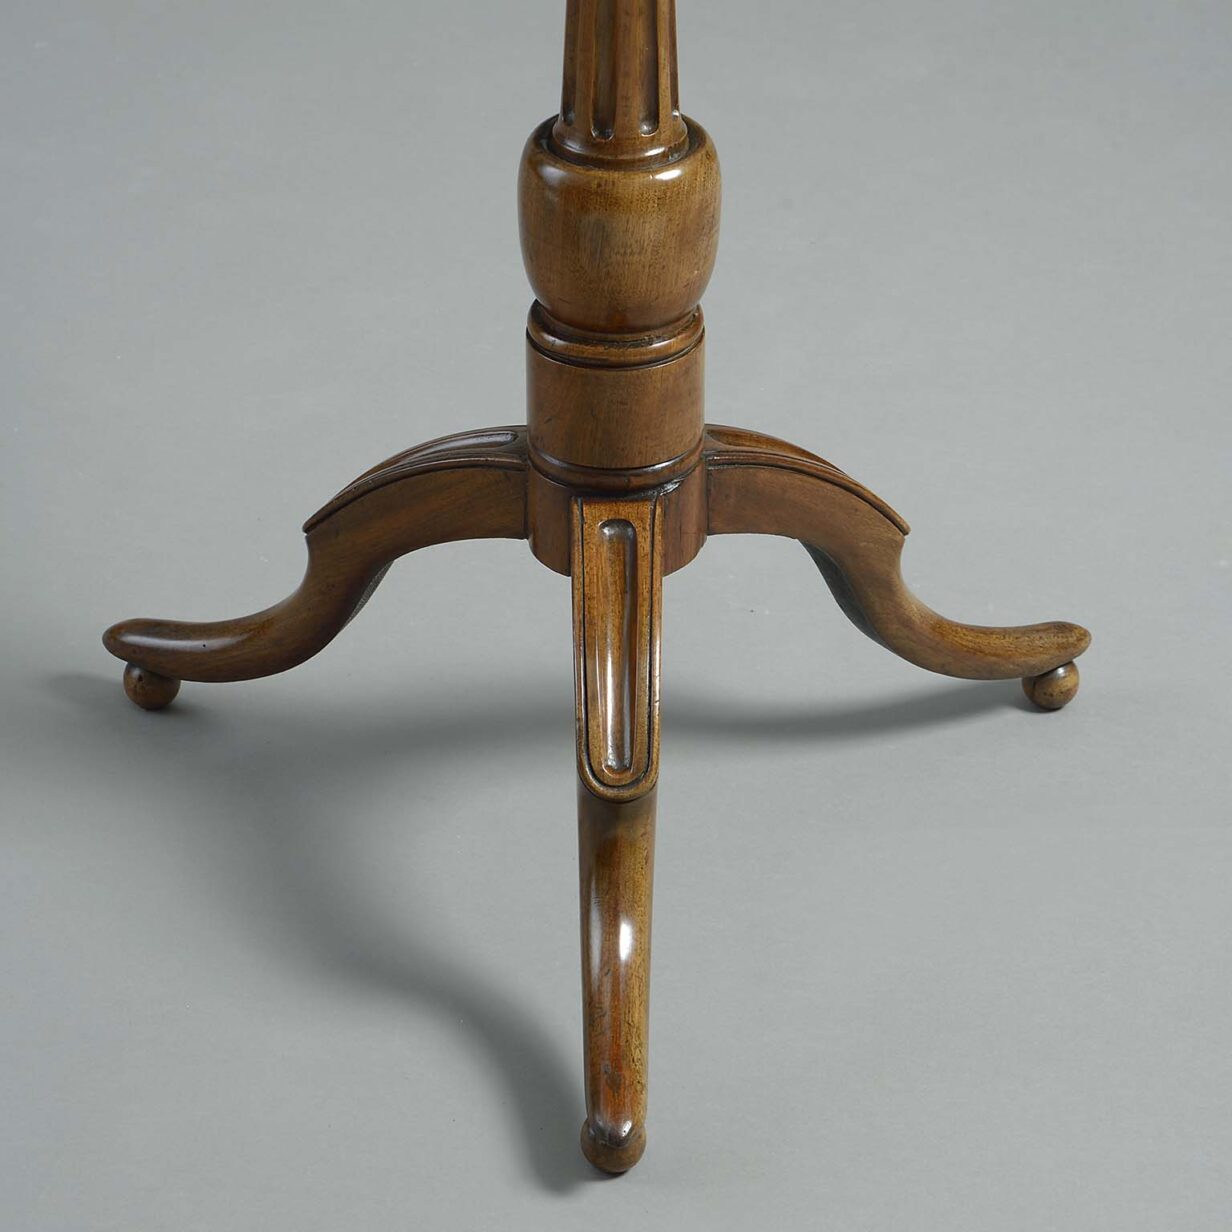 Late 18th century louis xvi period occasional table